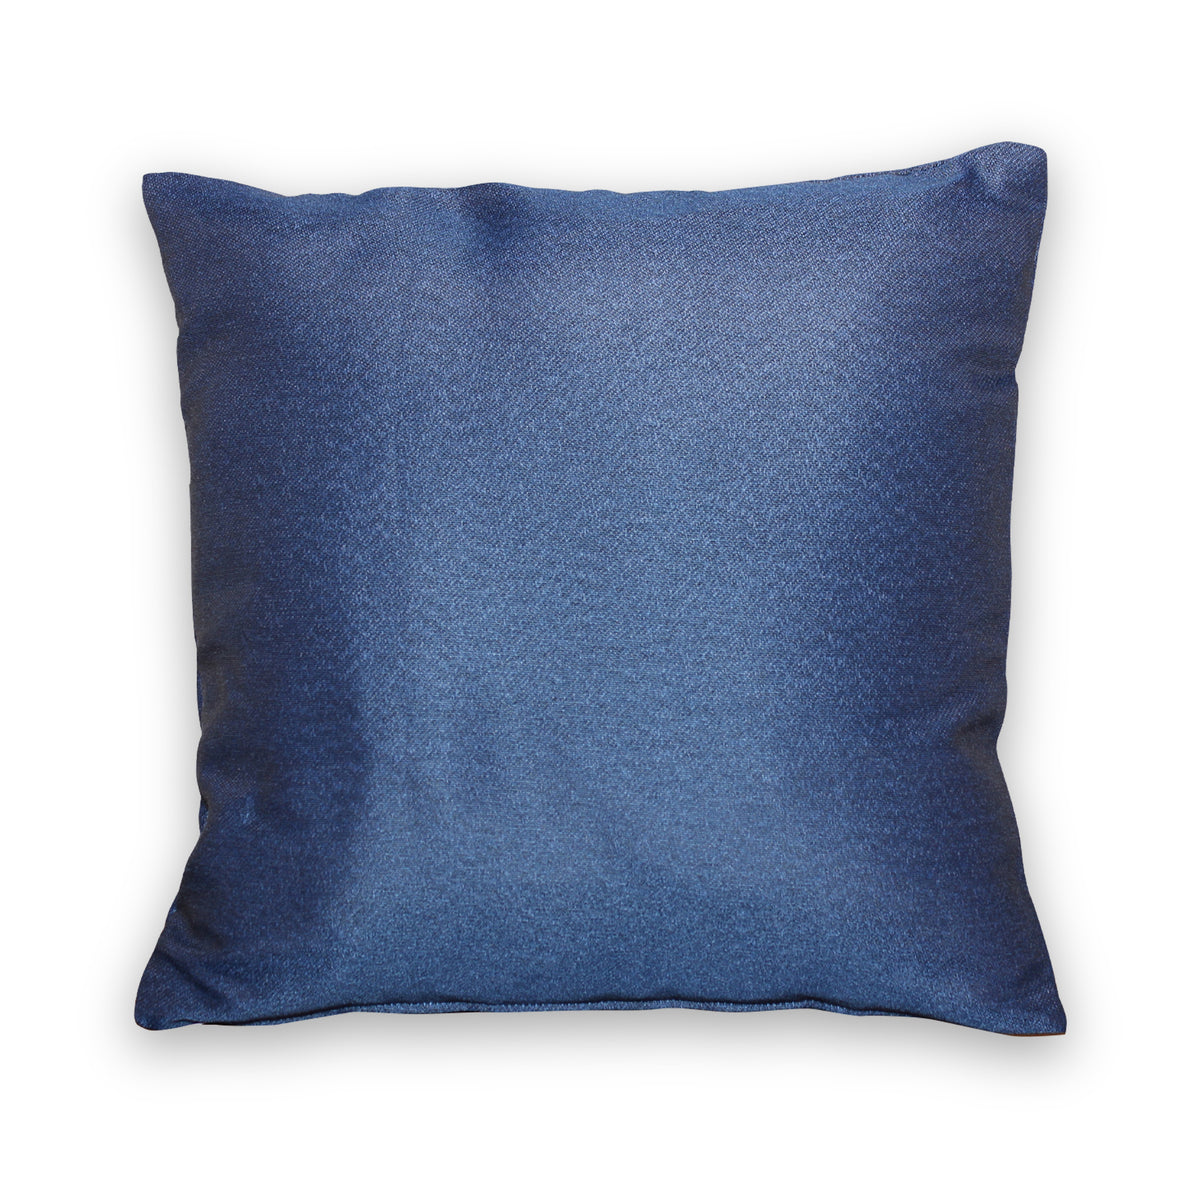 Outdoor Blue Plain Scatter Cushion from Roseland